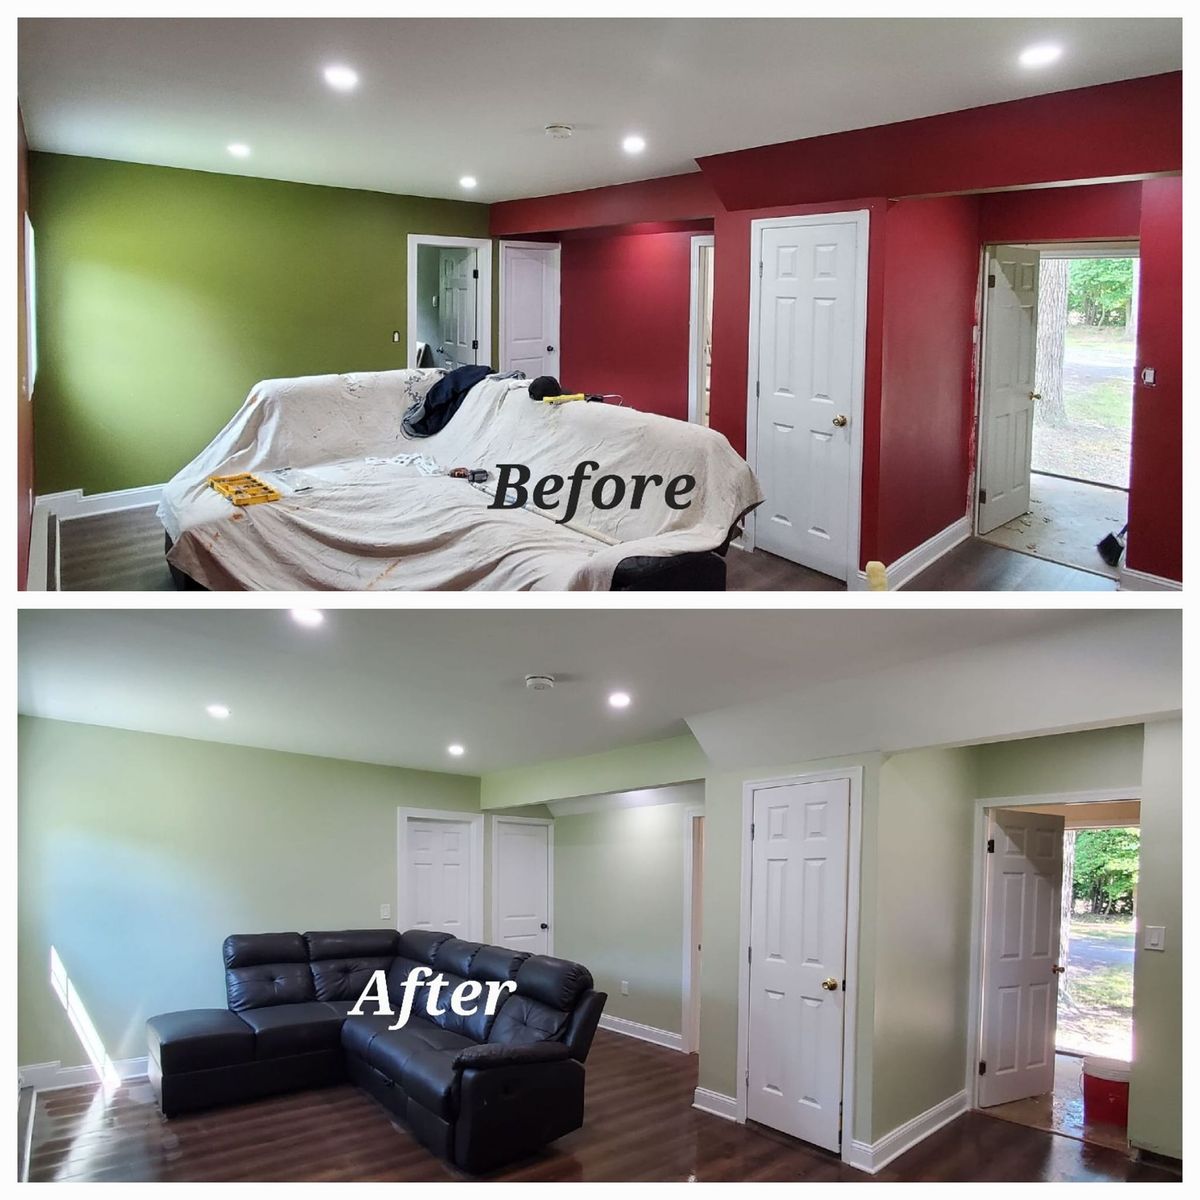 Interior Painting for Walters Professional Painting & Home Improvements LLC in Frankford, Delaware